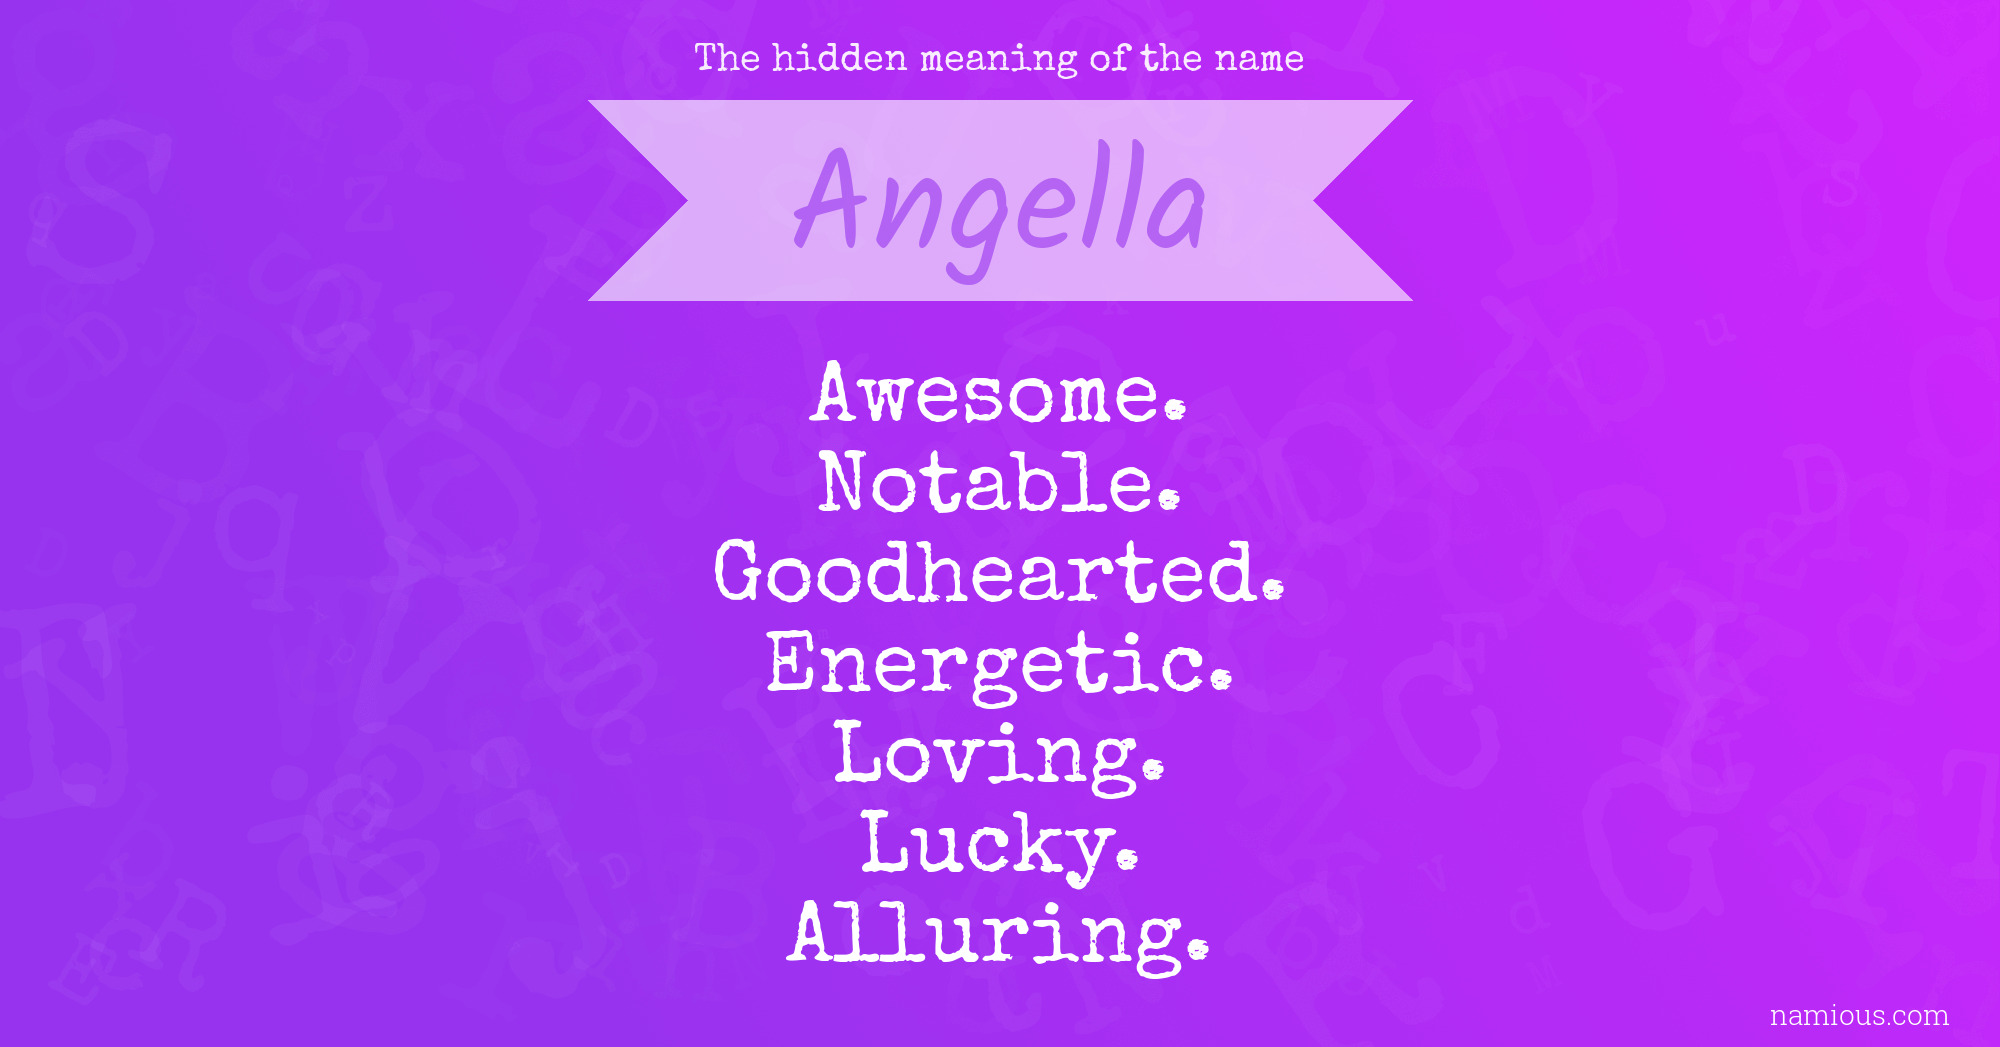 The hidden meaning of the name Angella